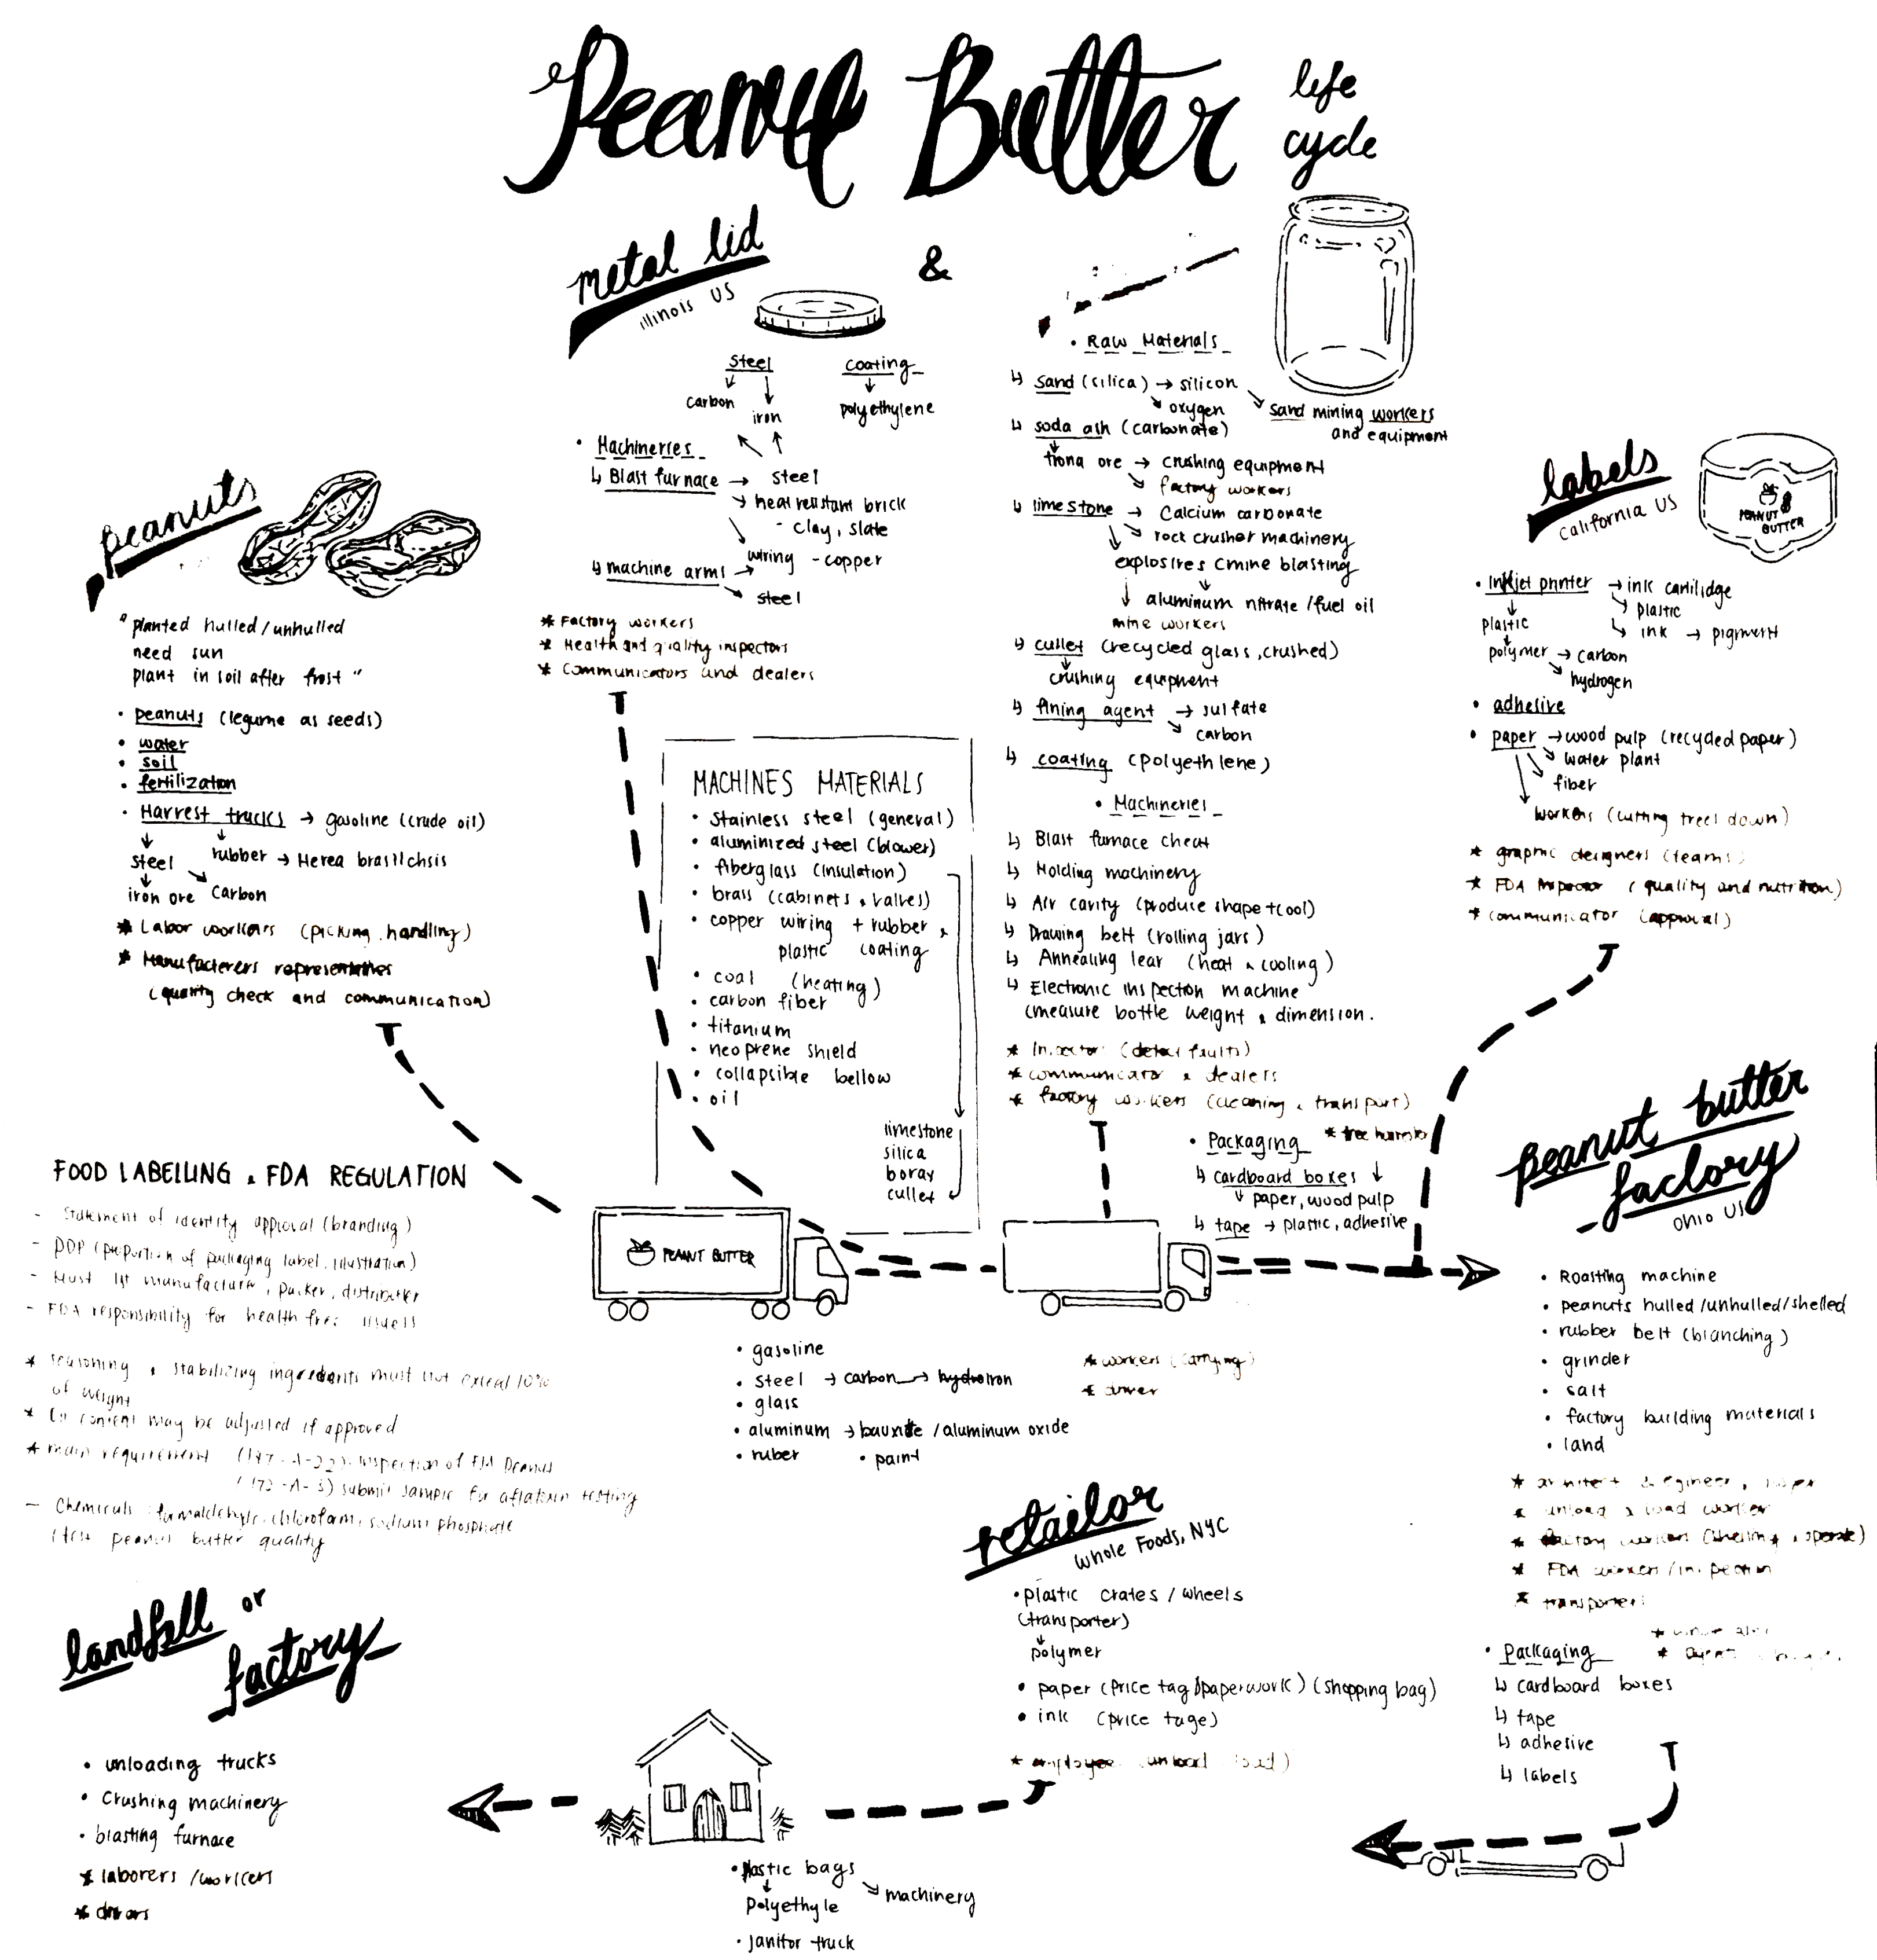 Peanut Butter Life Cycle